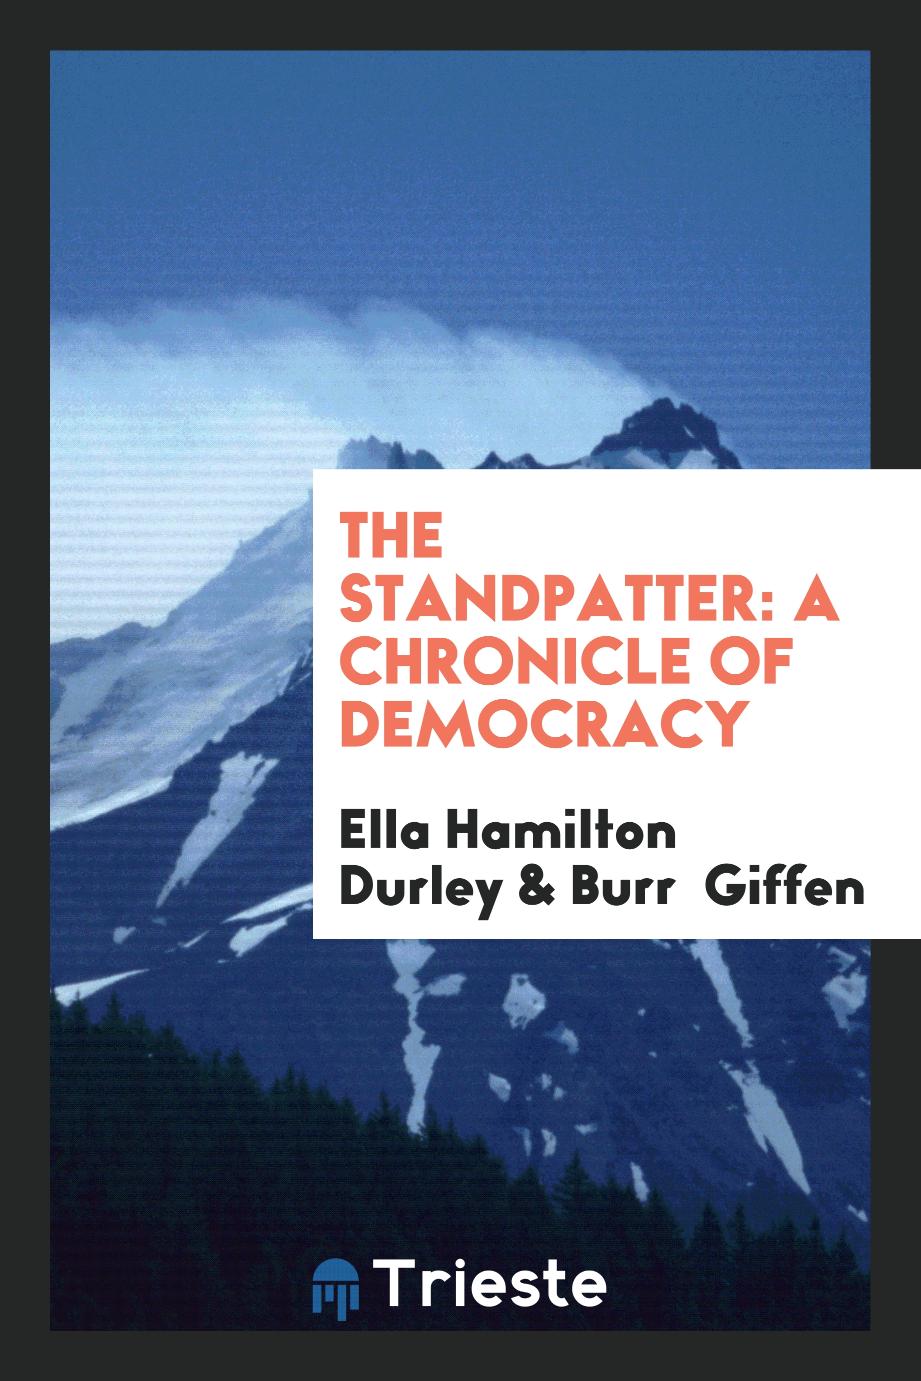 The Standpatter: A Chronicle of Democracy